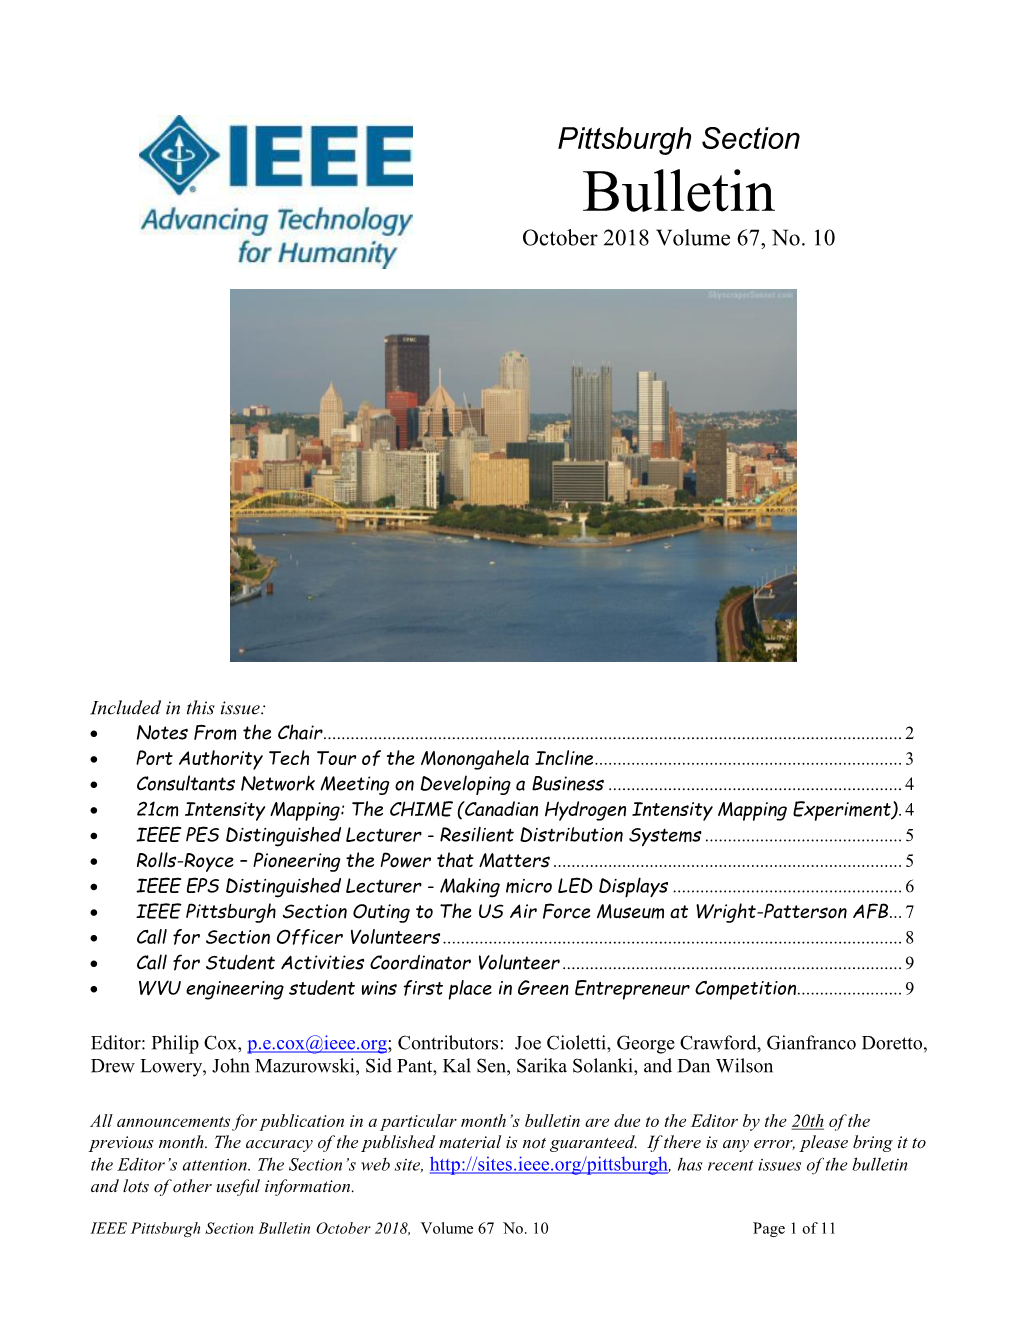 Pittsburgh Section Bulletin October 2018 Volume 67, No